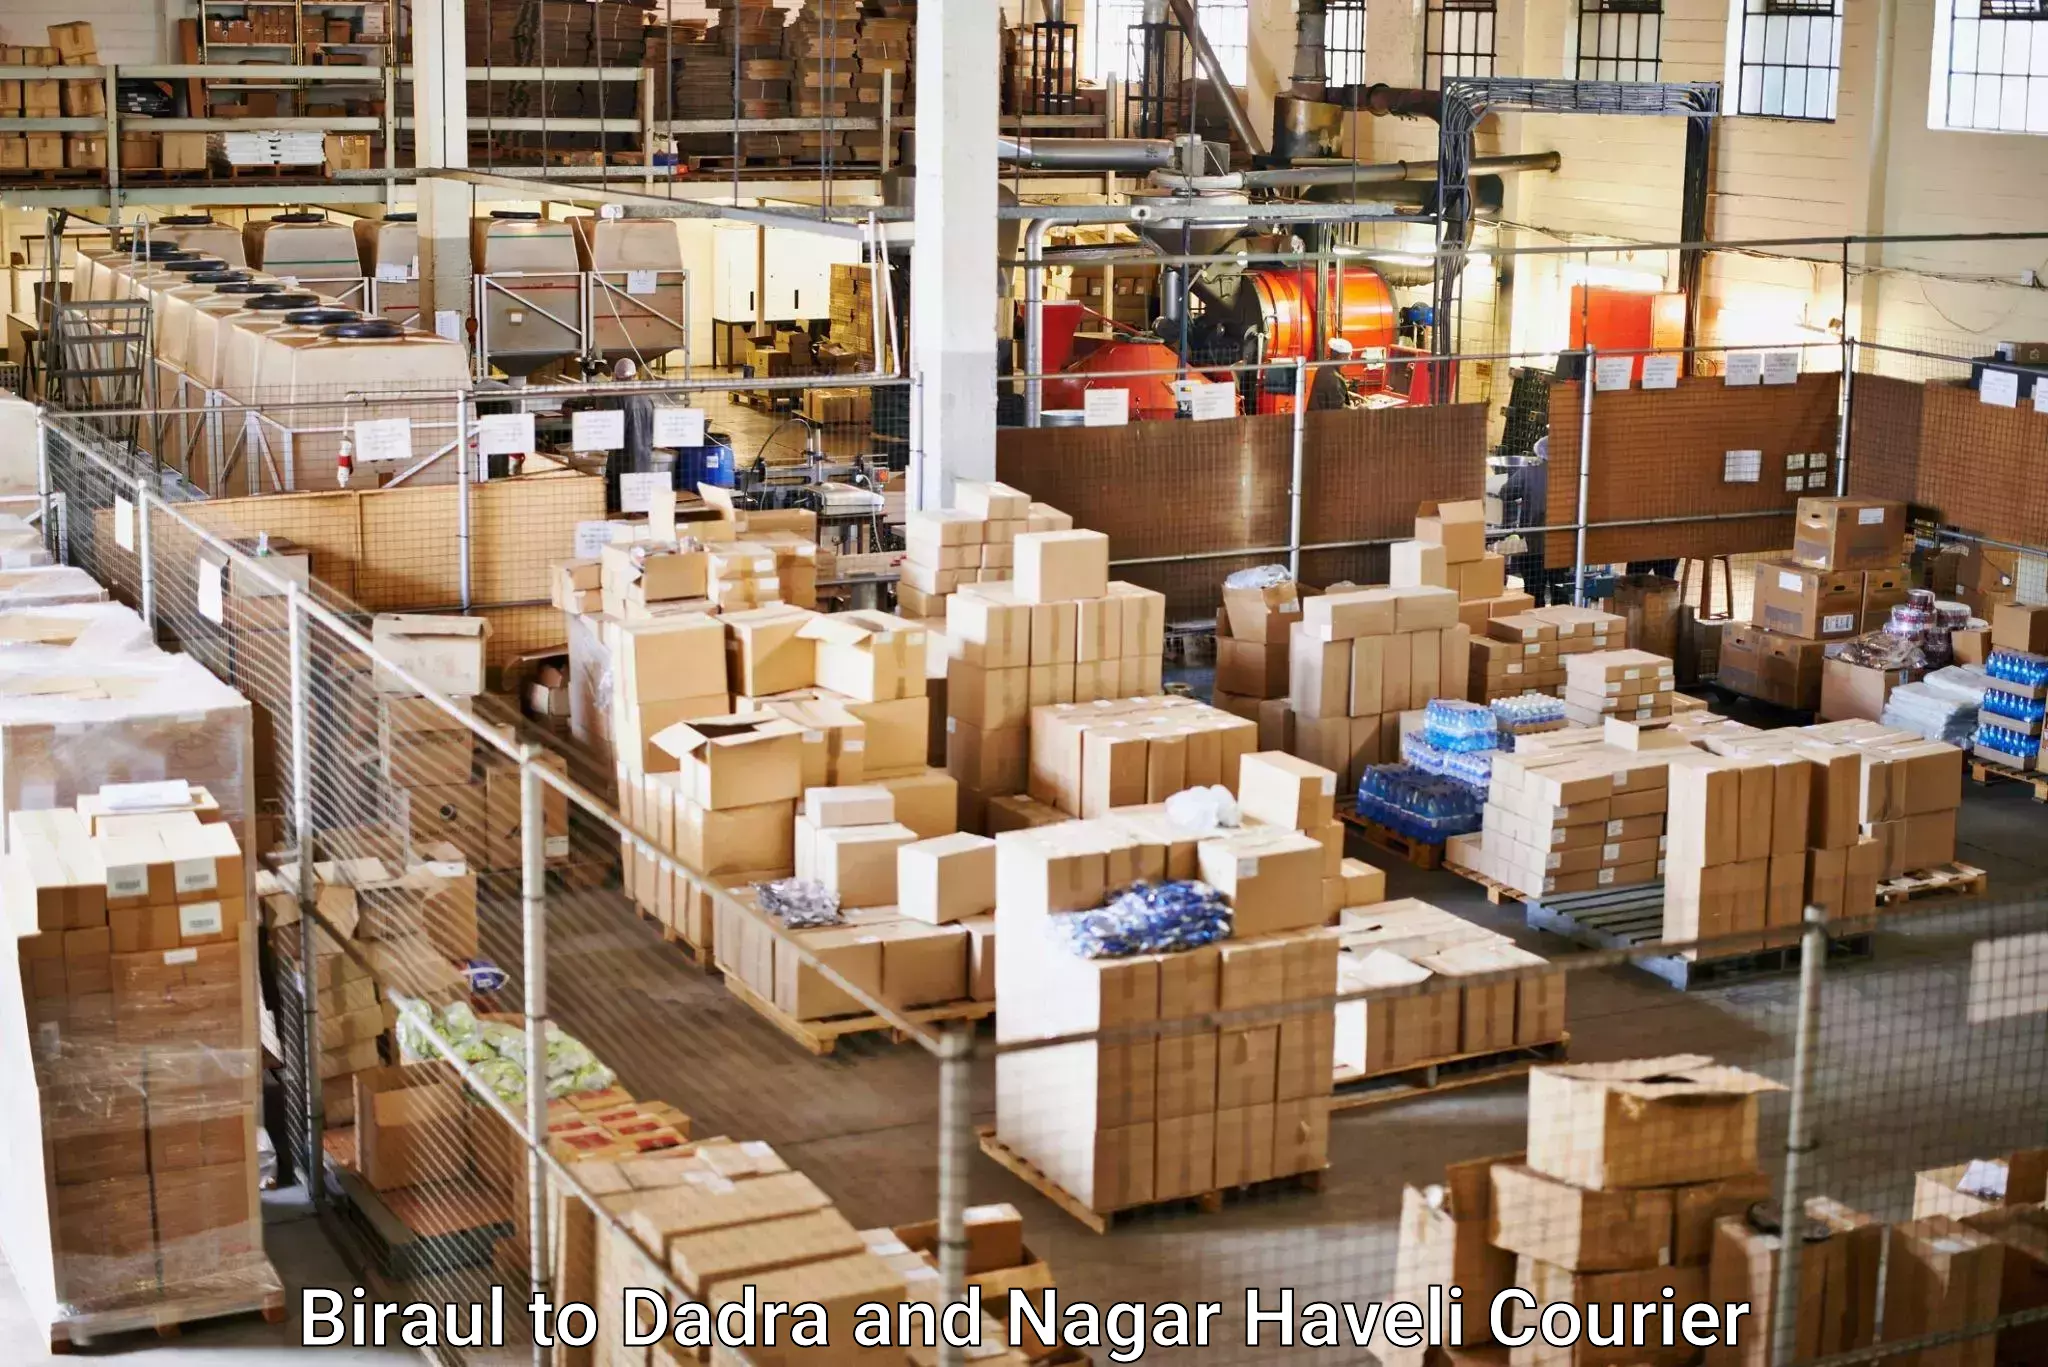 Expedited shipping solutions Biraul to Dadra and Nagar Haveli